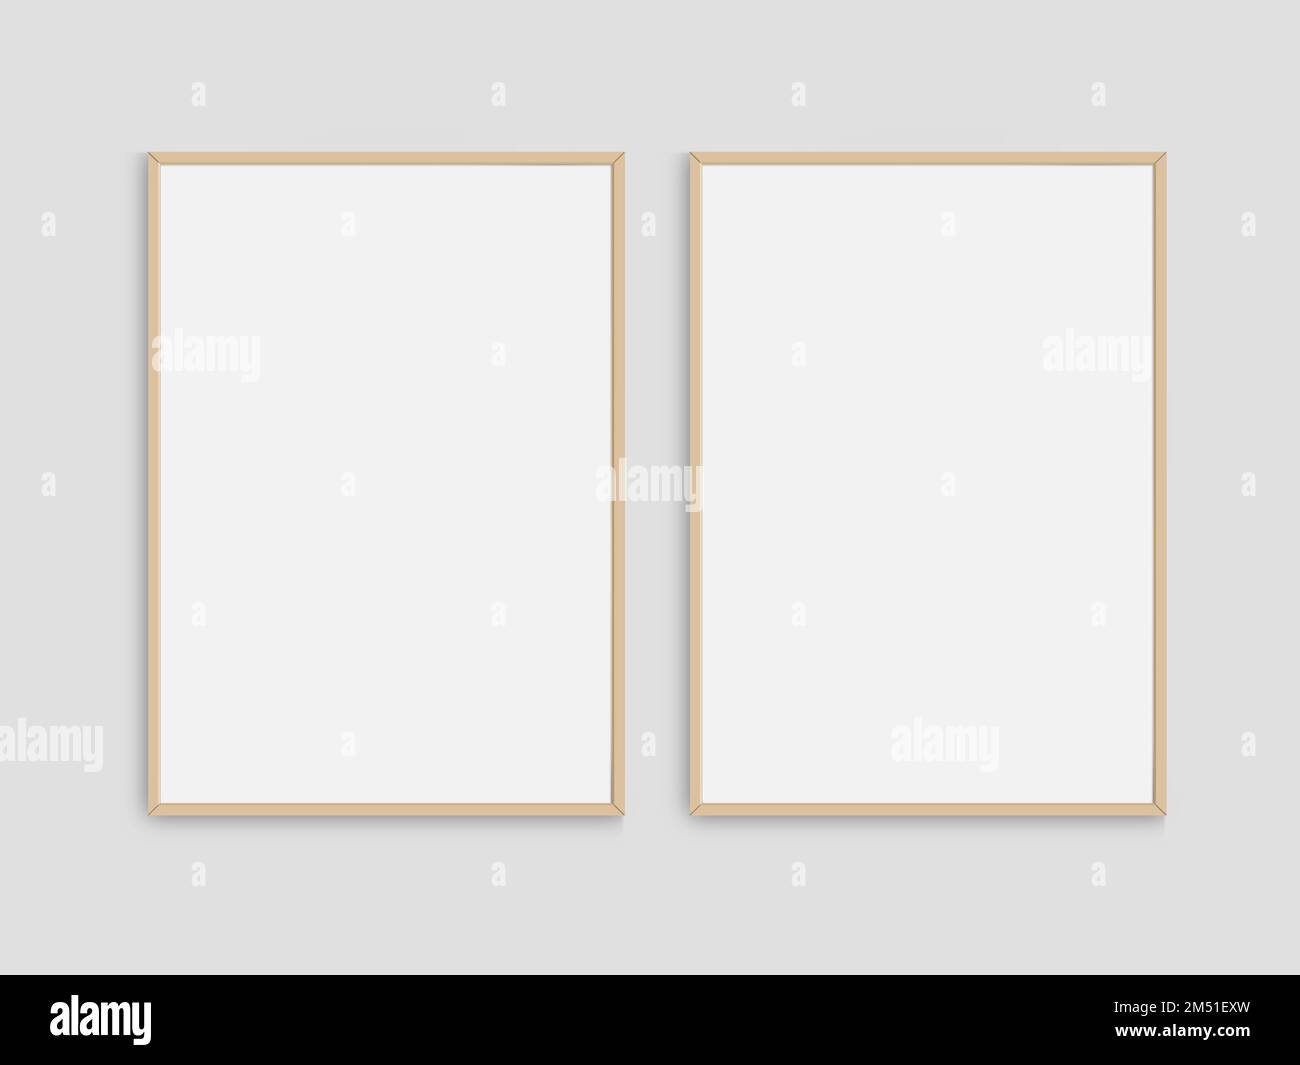 https://c8.alamy.com/comp/2M51EXW/set-of-2-realistic-photo-frames-mockup-portrait-large-a3-a4-wooden-frame-mockup-on-white-blank-wall-simple-clean-modern-poster-frame-mockup-2M51EXW.jpg